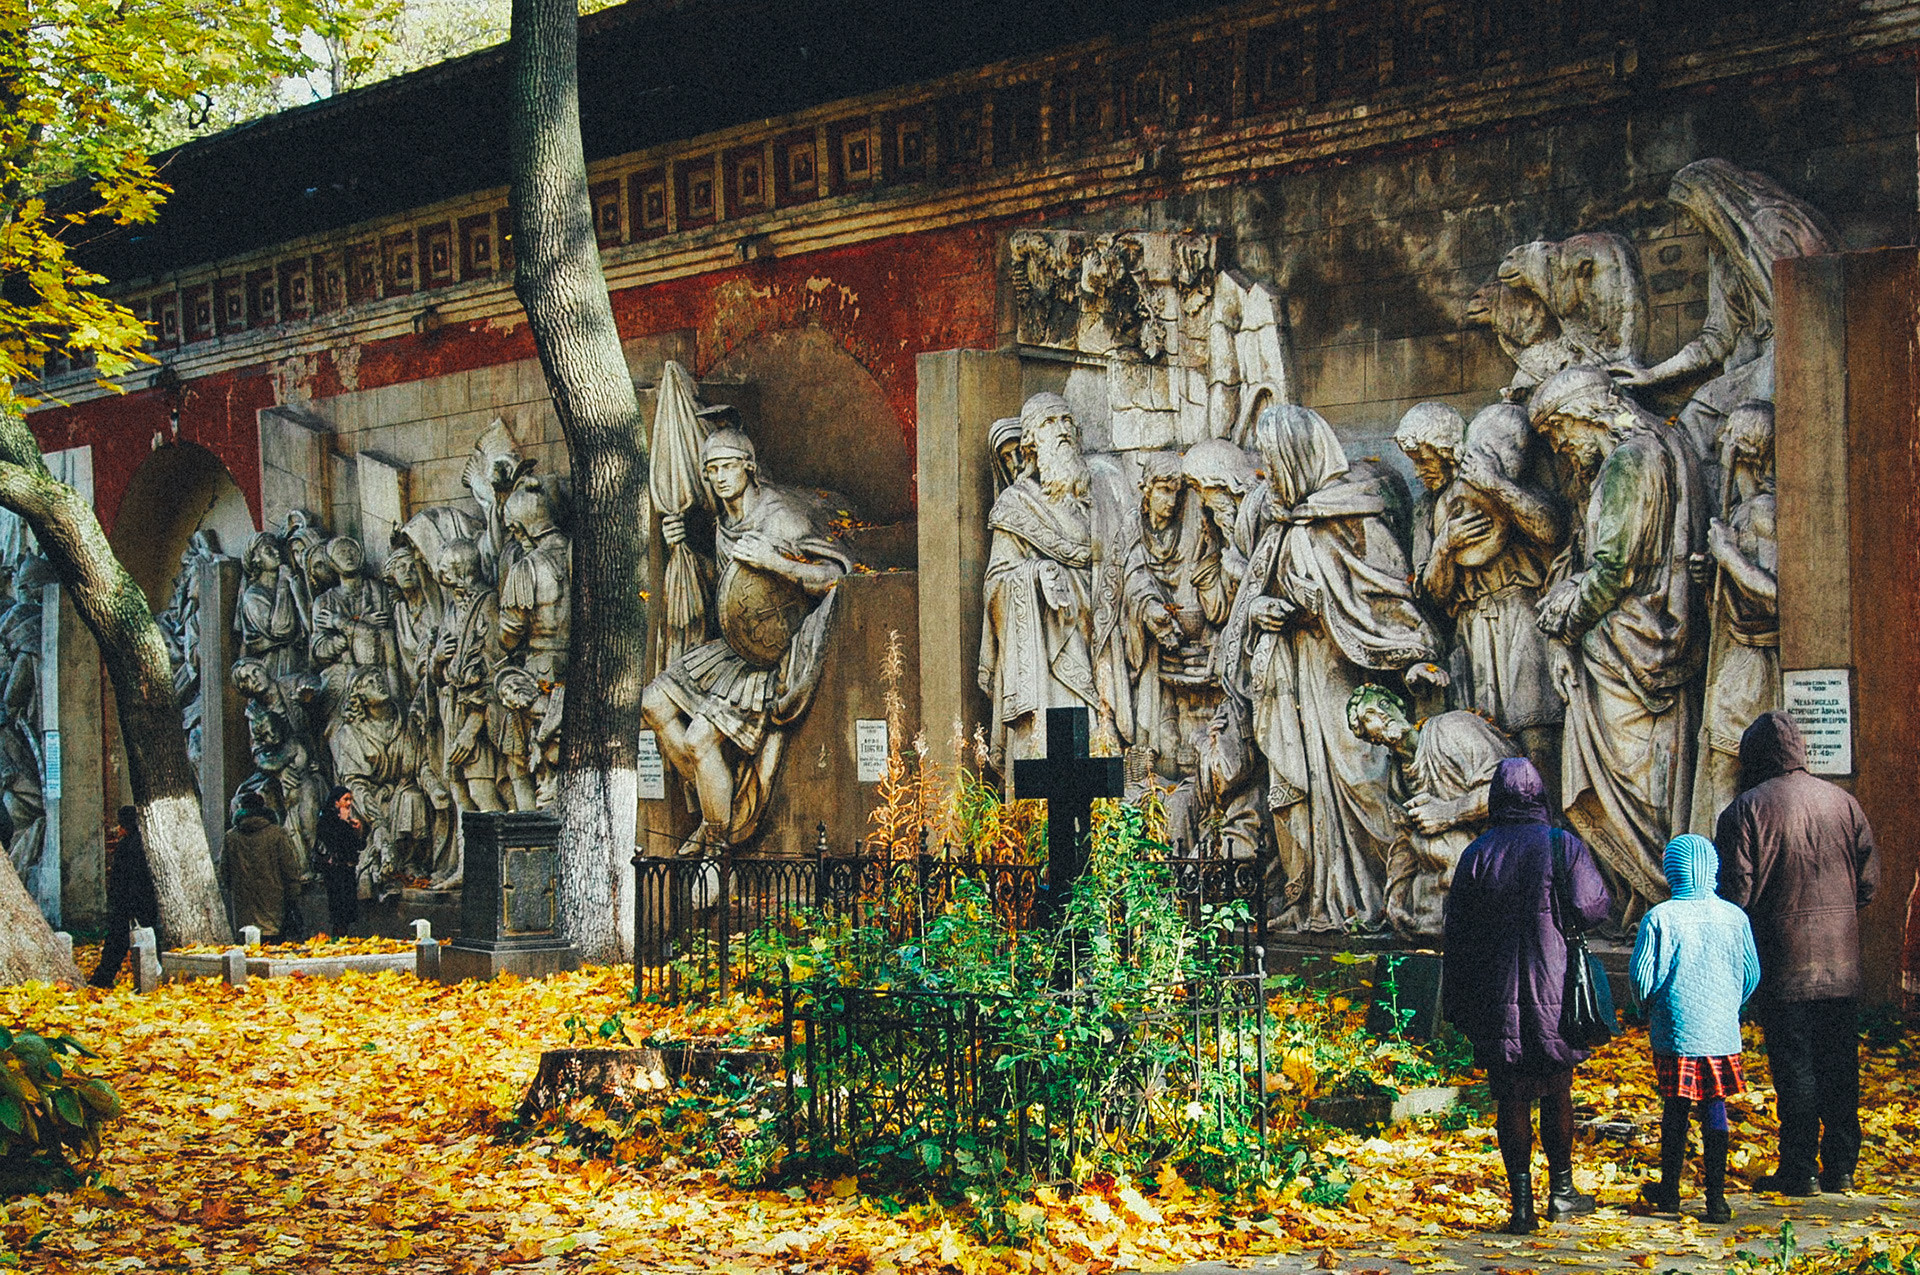 Sculptures from the original Cathedral of Christ the Savior (demolished in 1931) on display at Donskoe cemetery in Moscow